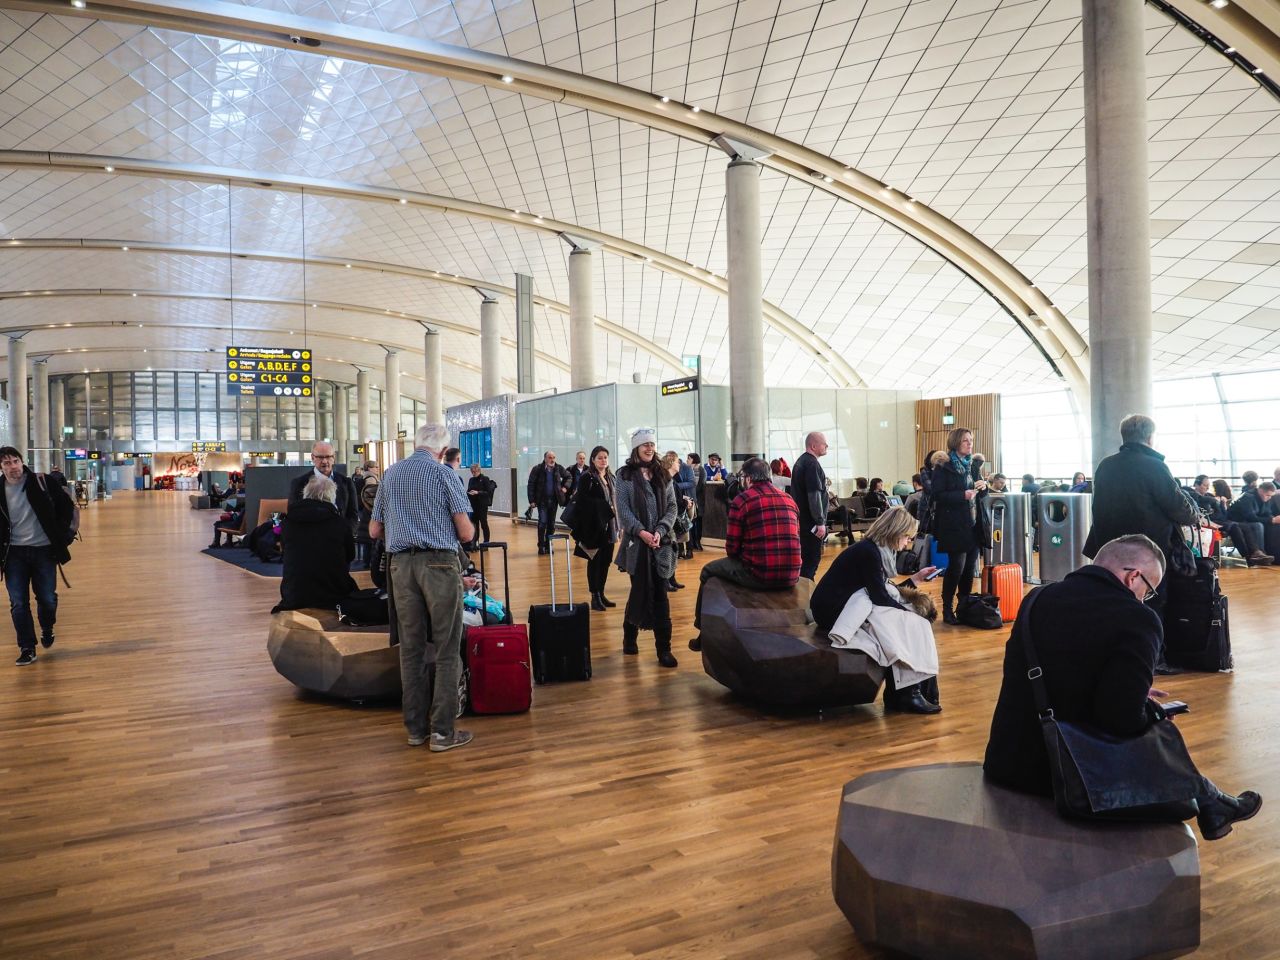 <strong>Nordic identity:</strong> "In addition to being a very energy-efficient material, wood gives the terminal a very Nordic identity. We believe that after an era where most airports look the same, it is time to highlight those elements that can give travelers a sense of place," says Nordic's Bjørn Olav Susæg. 